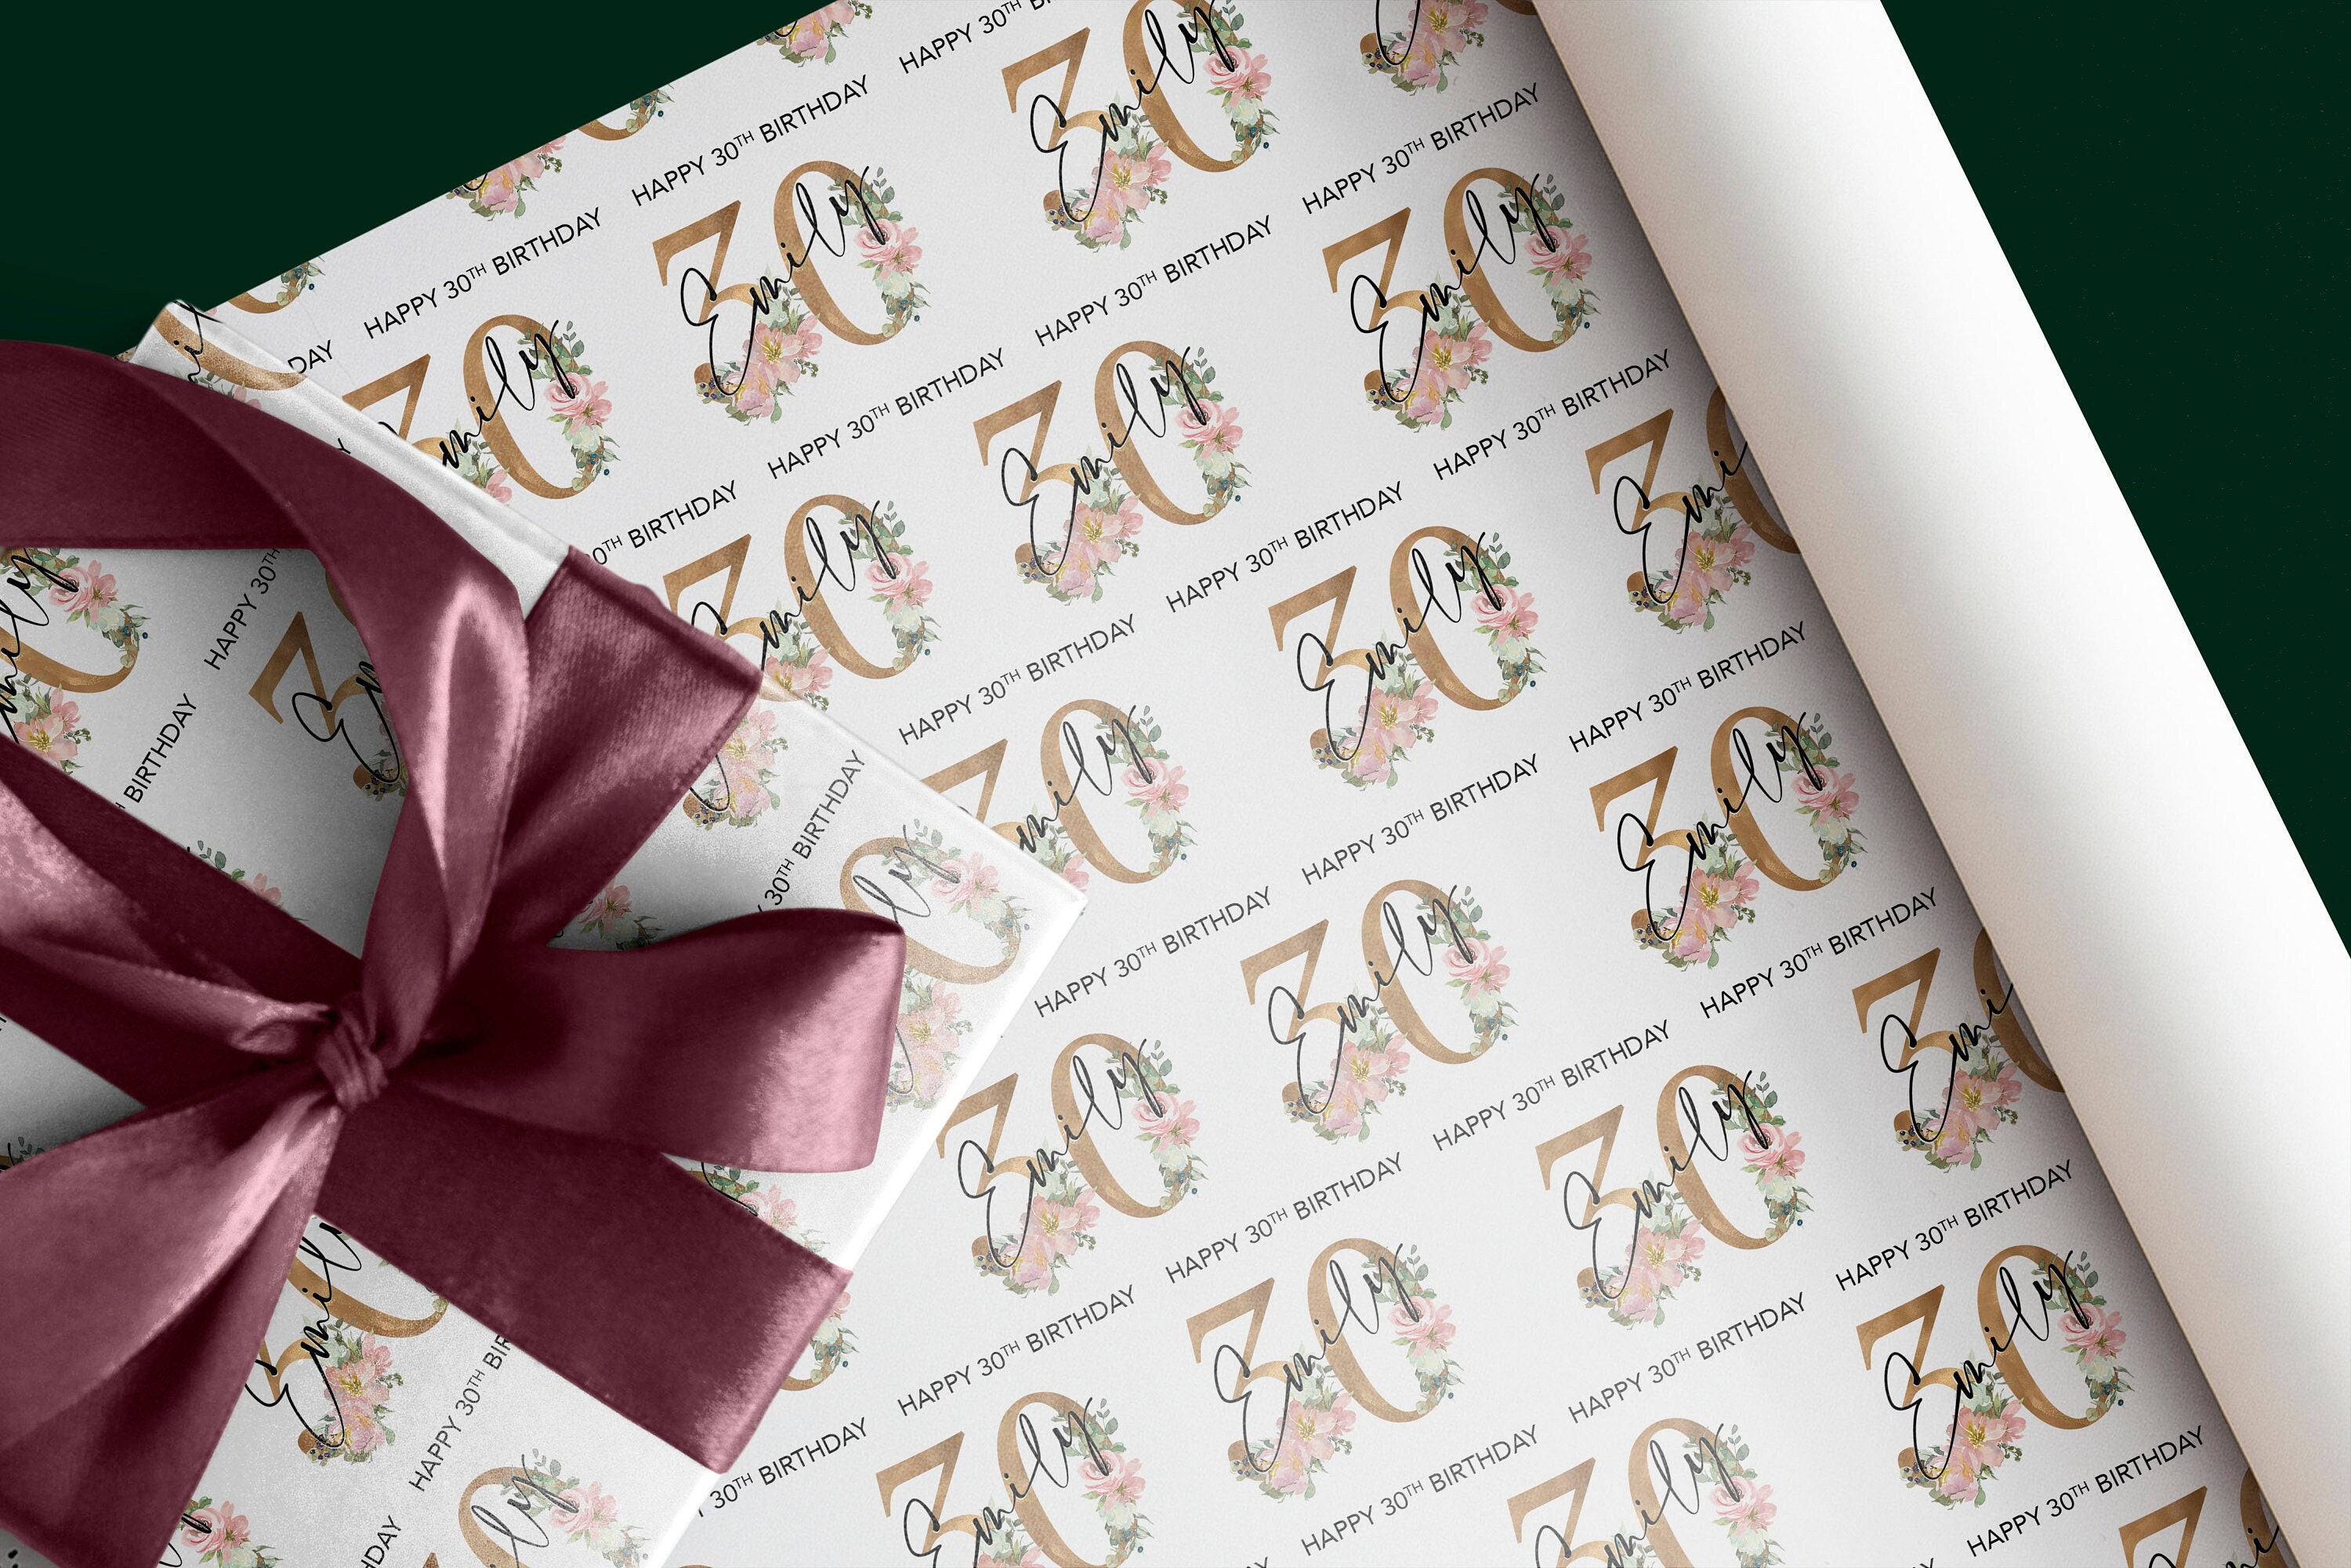 Book Themed Wrapping Paper for Literary Gift or Birthday Wrapping Idea 